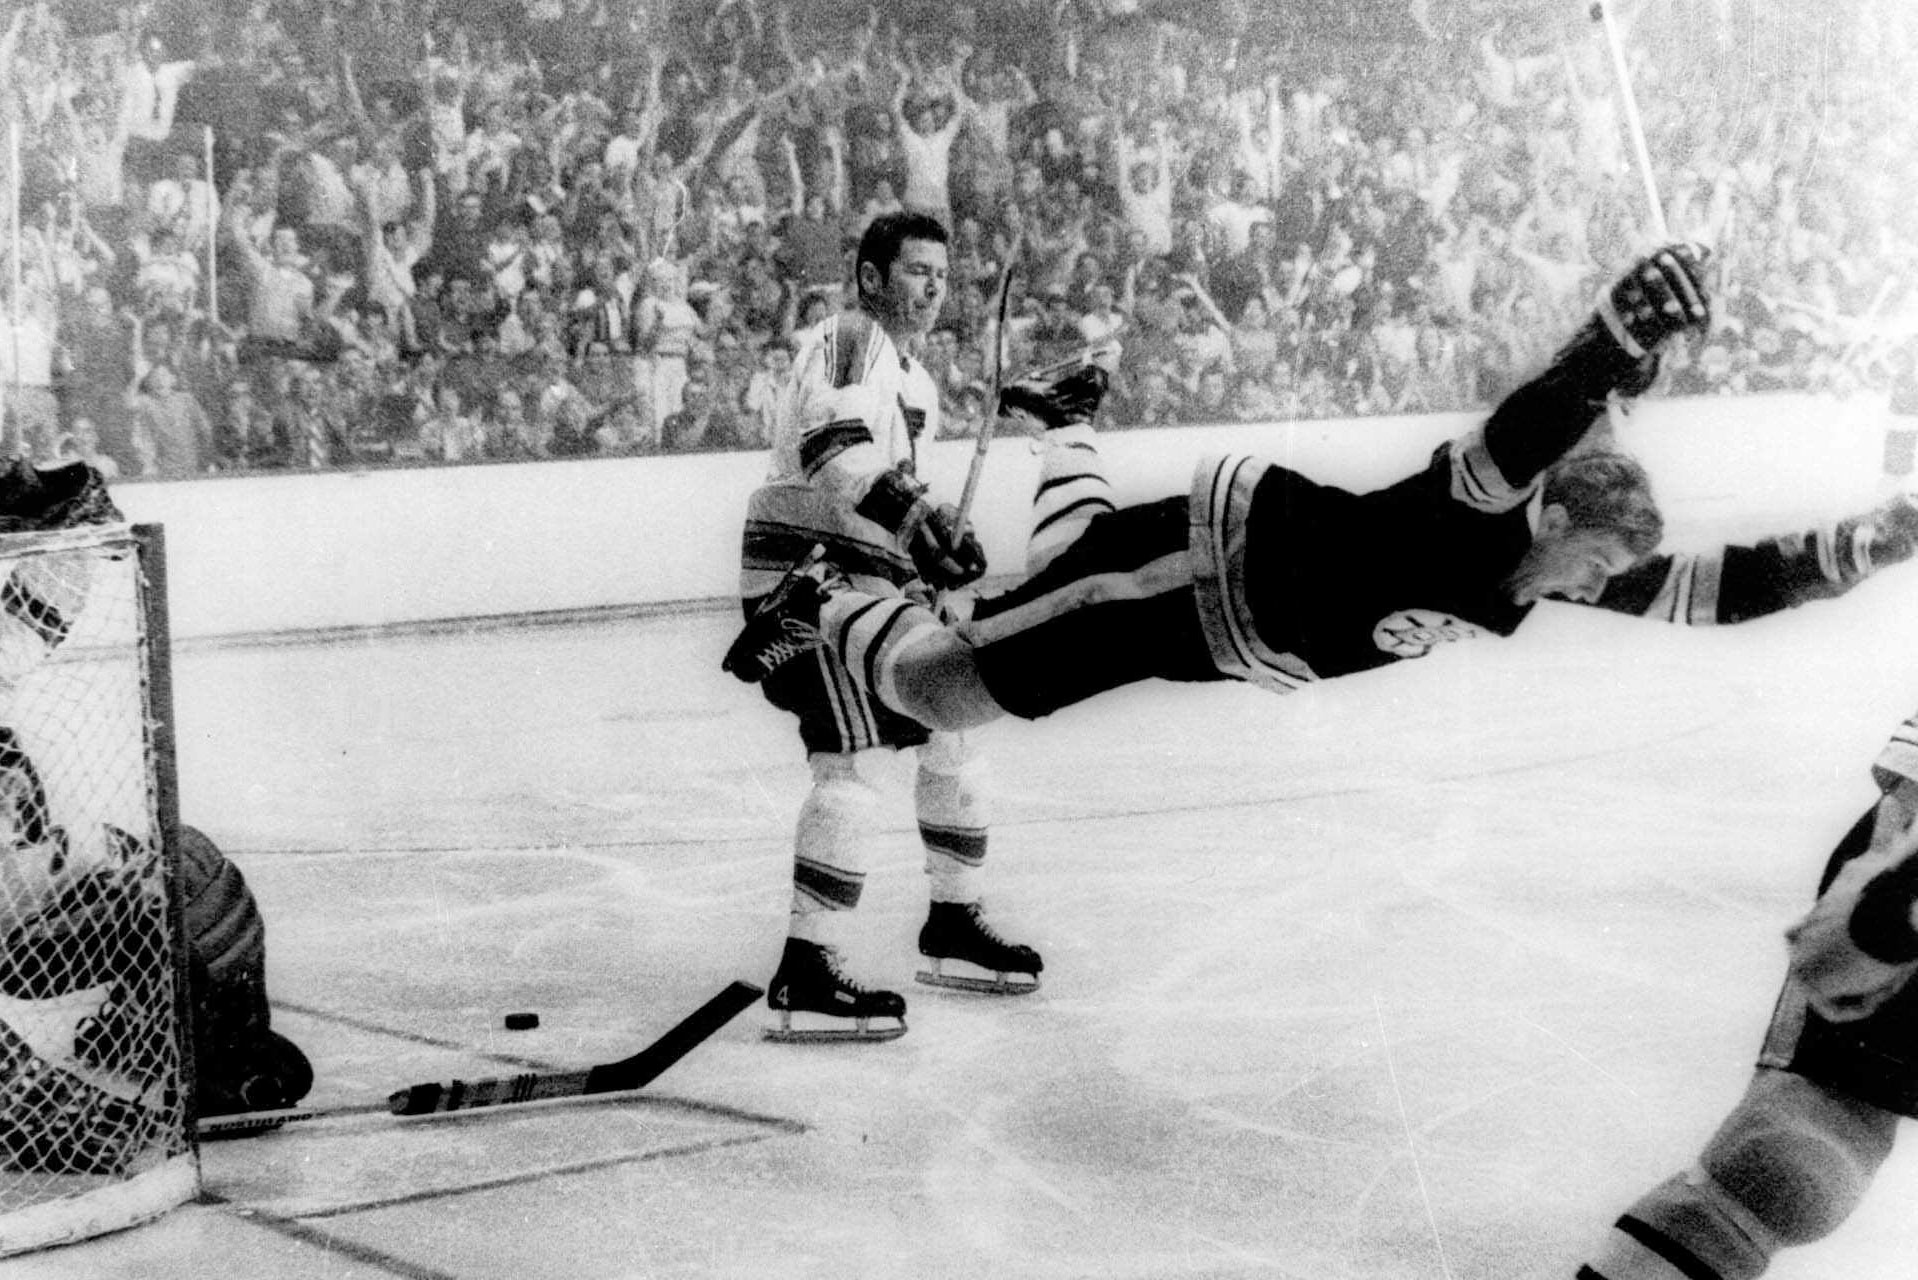 A photo of Bobby Orr scoring the game-winning goal in the 1970 Stanley Cup Championship